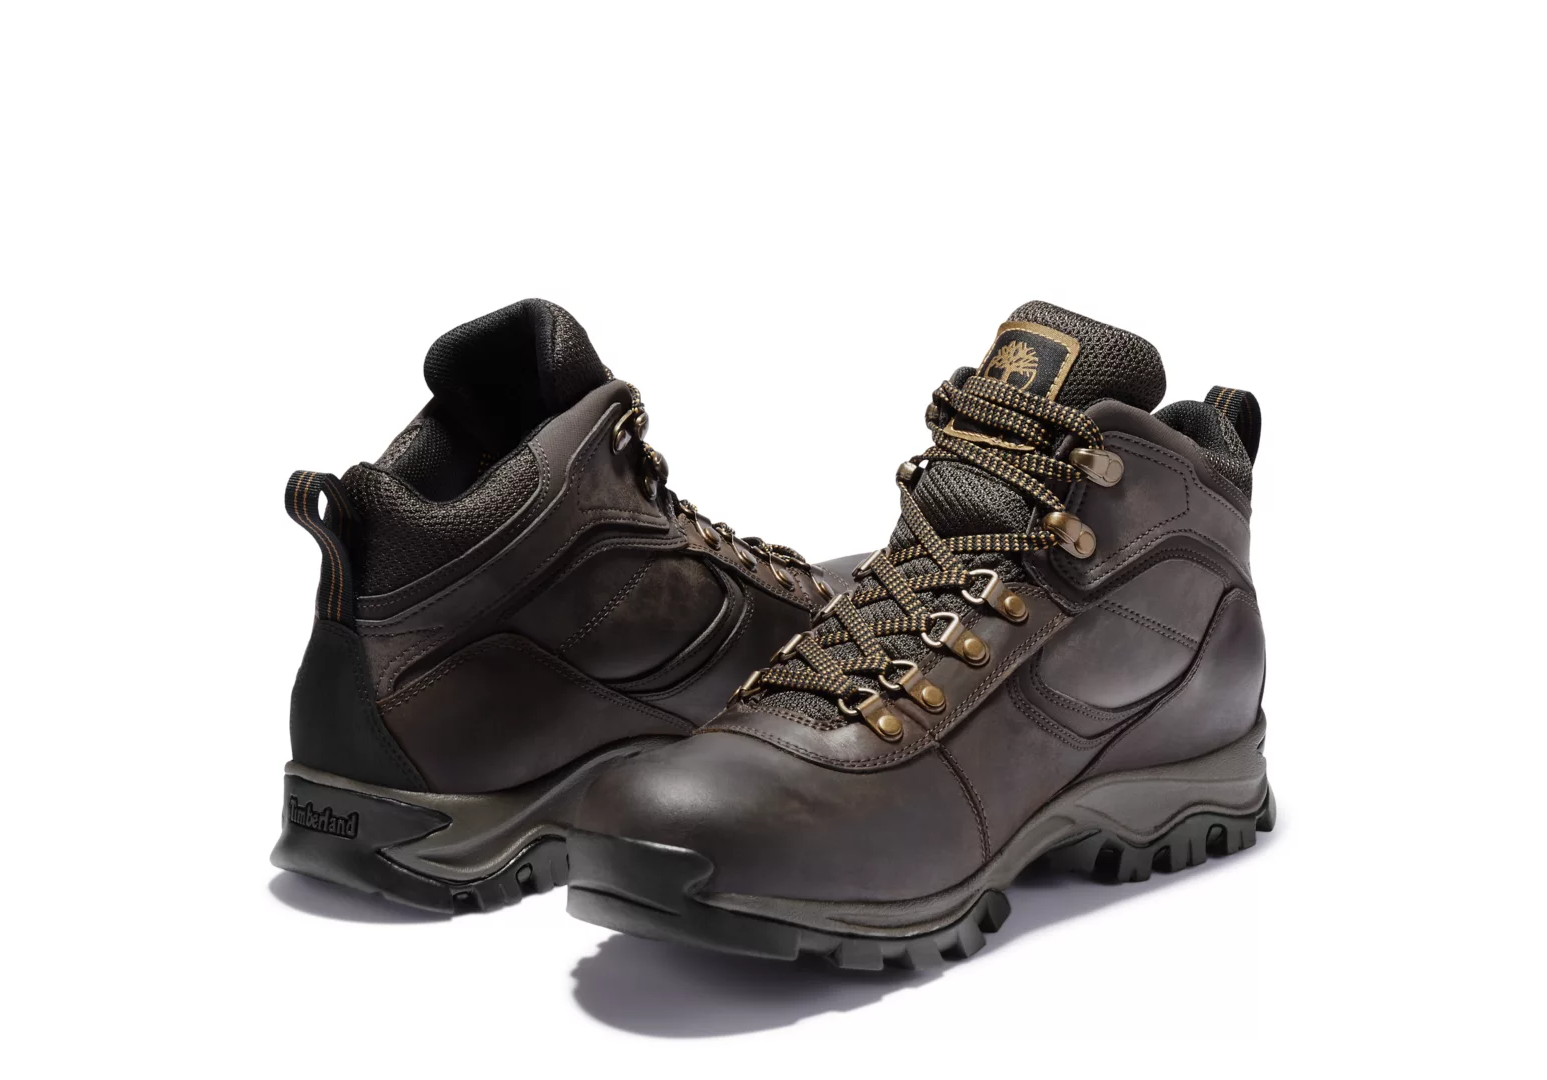 Best Hiking Boots